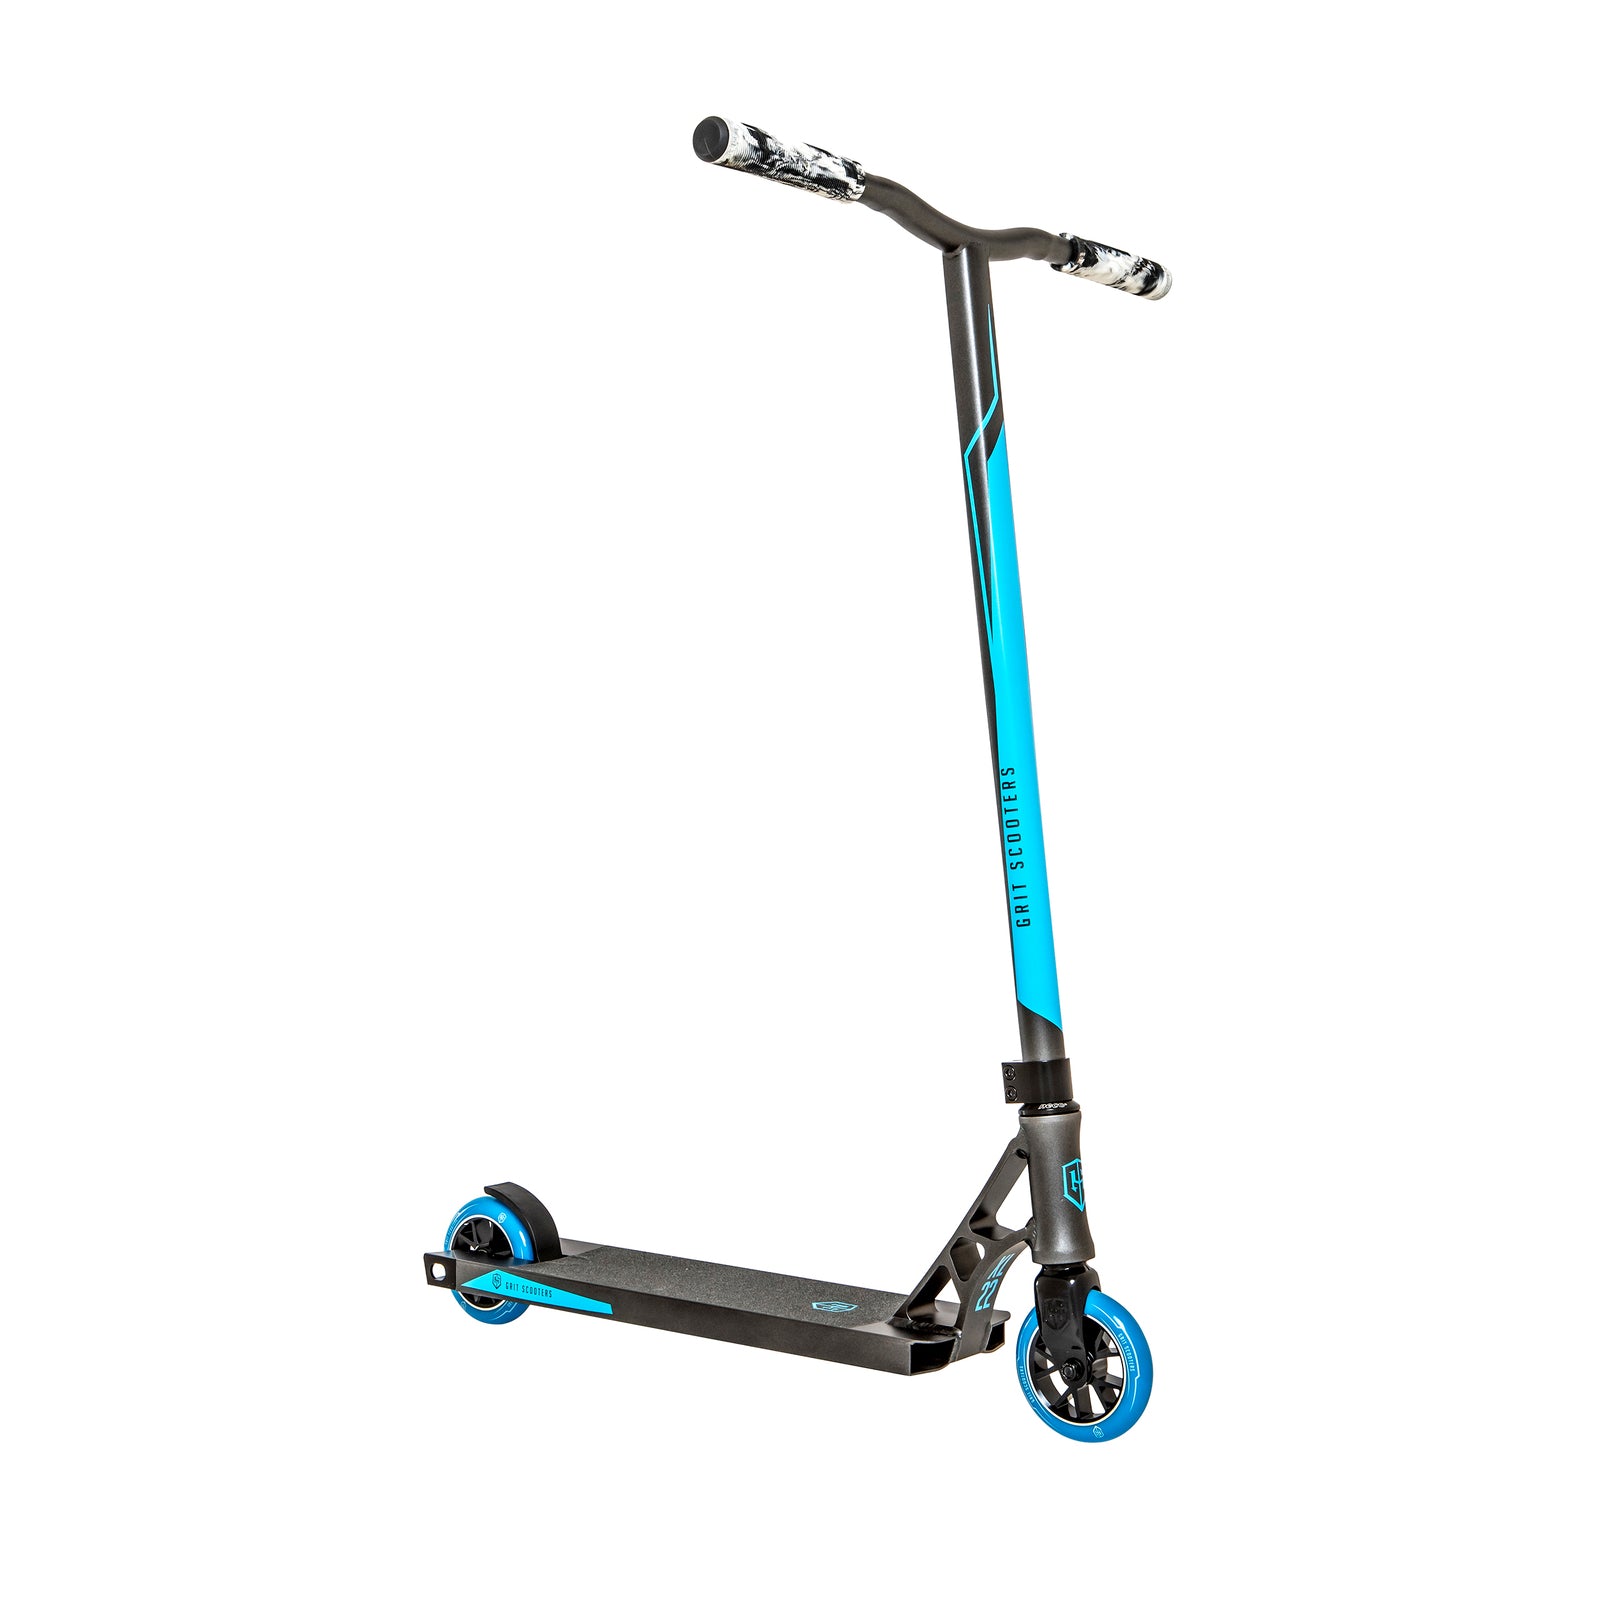 Grit ELITE XL scooter Silver with Blue Right Side